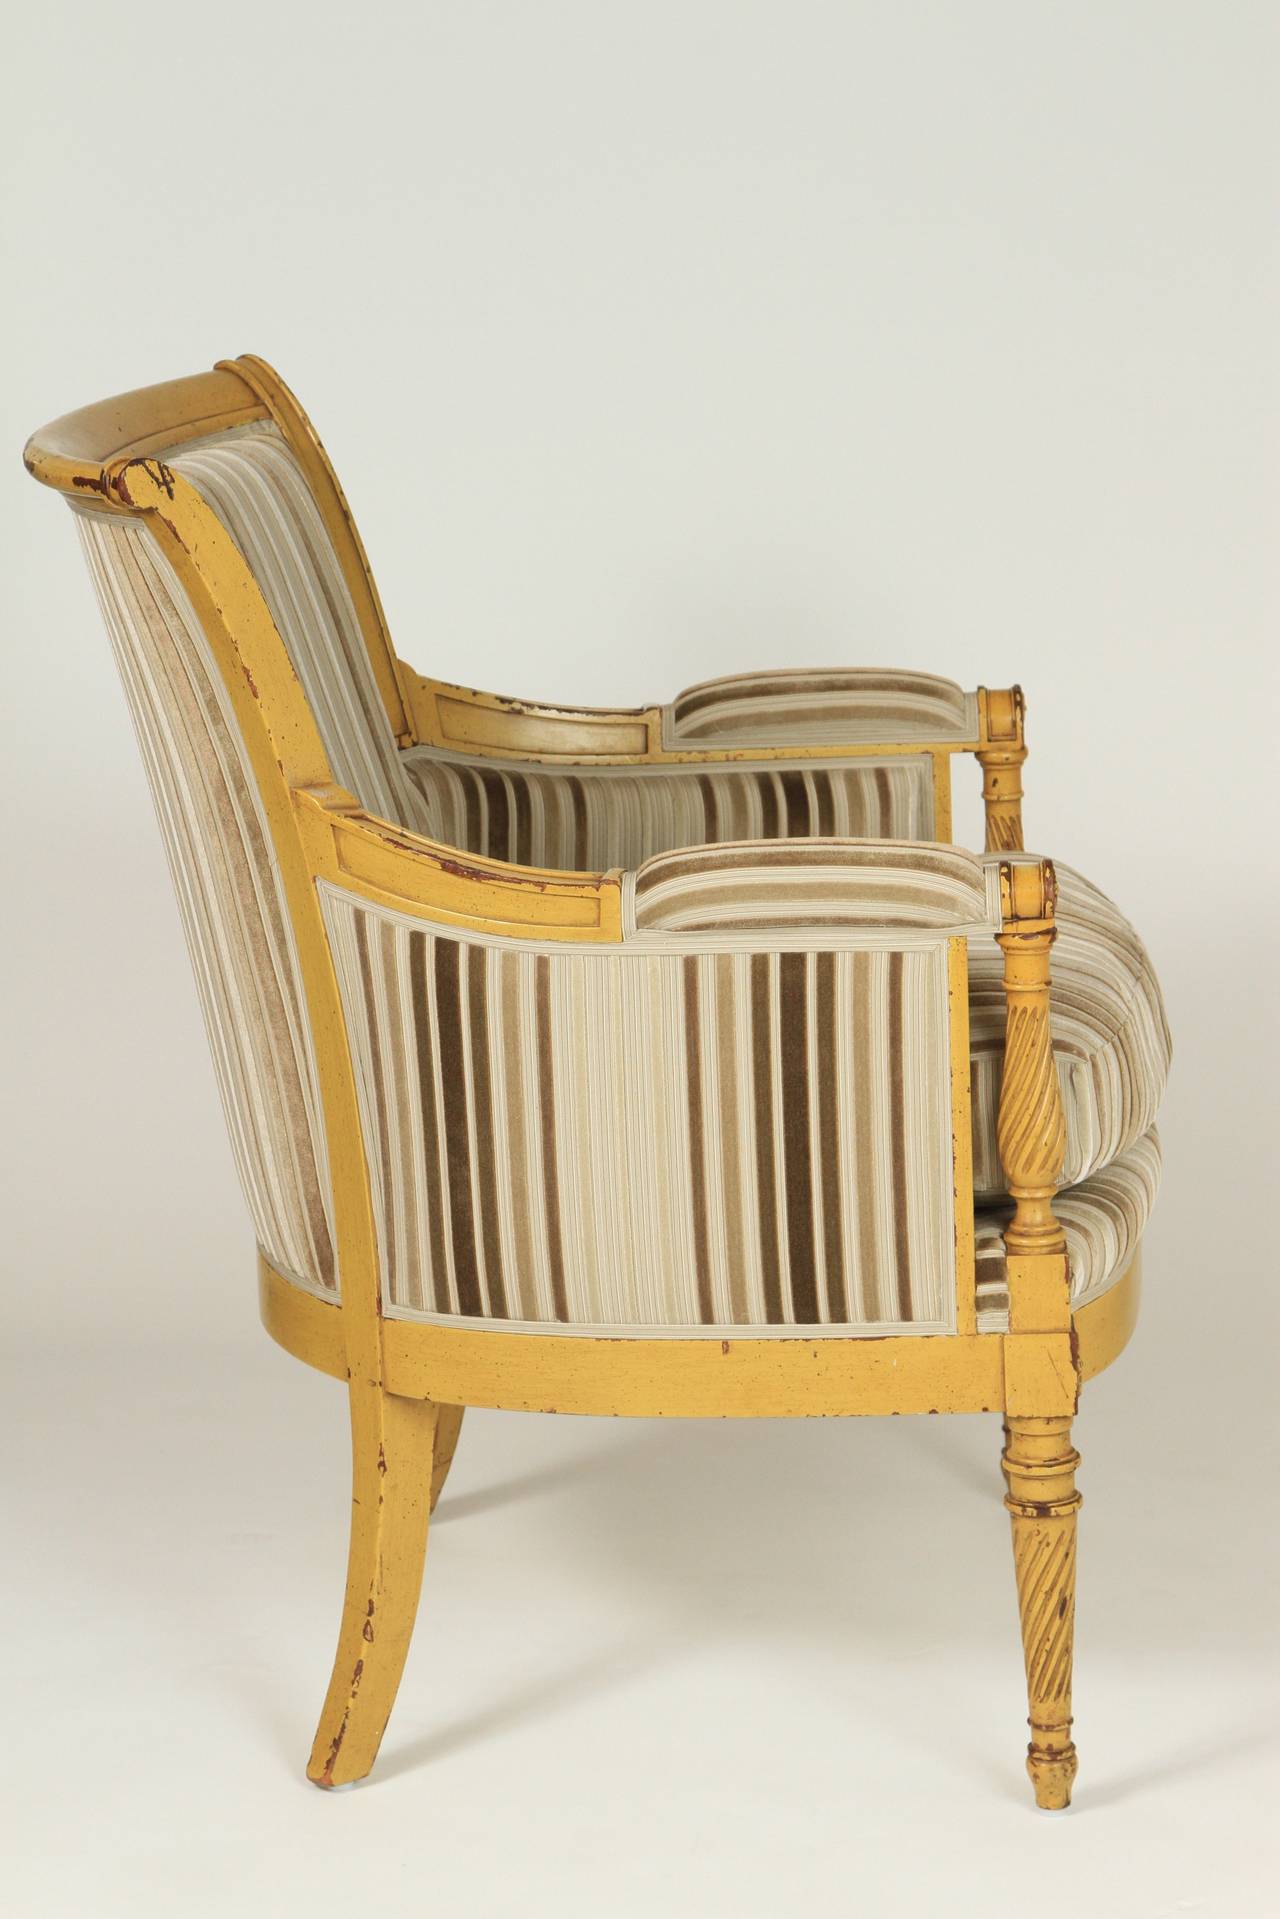 Stylish pair of Bergere chairs. Newly upholstered in silk with cut velvet striping. Yellow painted frames are original and are nicely worn, which lends depth to the chairs' character. Down and feather cushions add to their luxury.